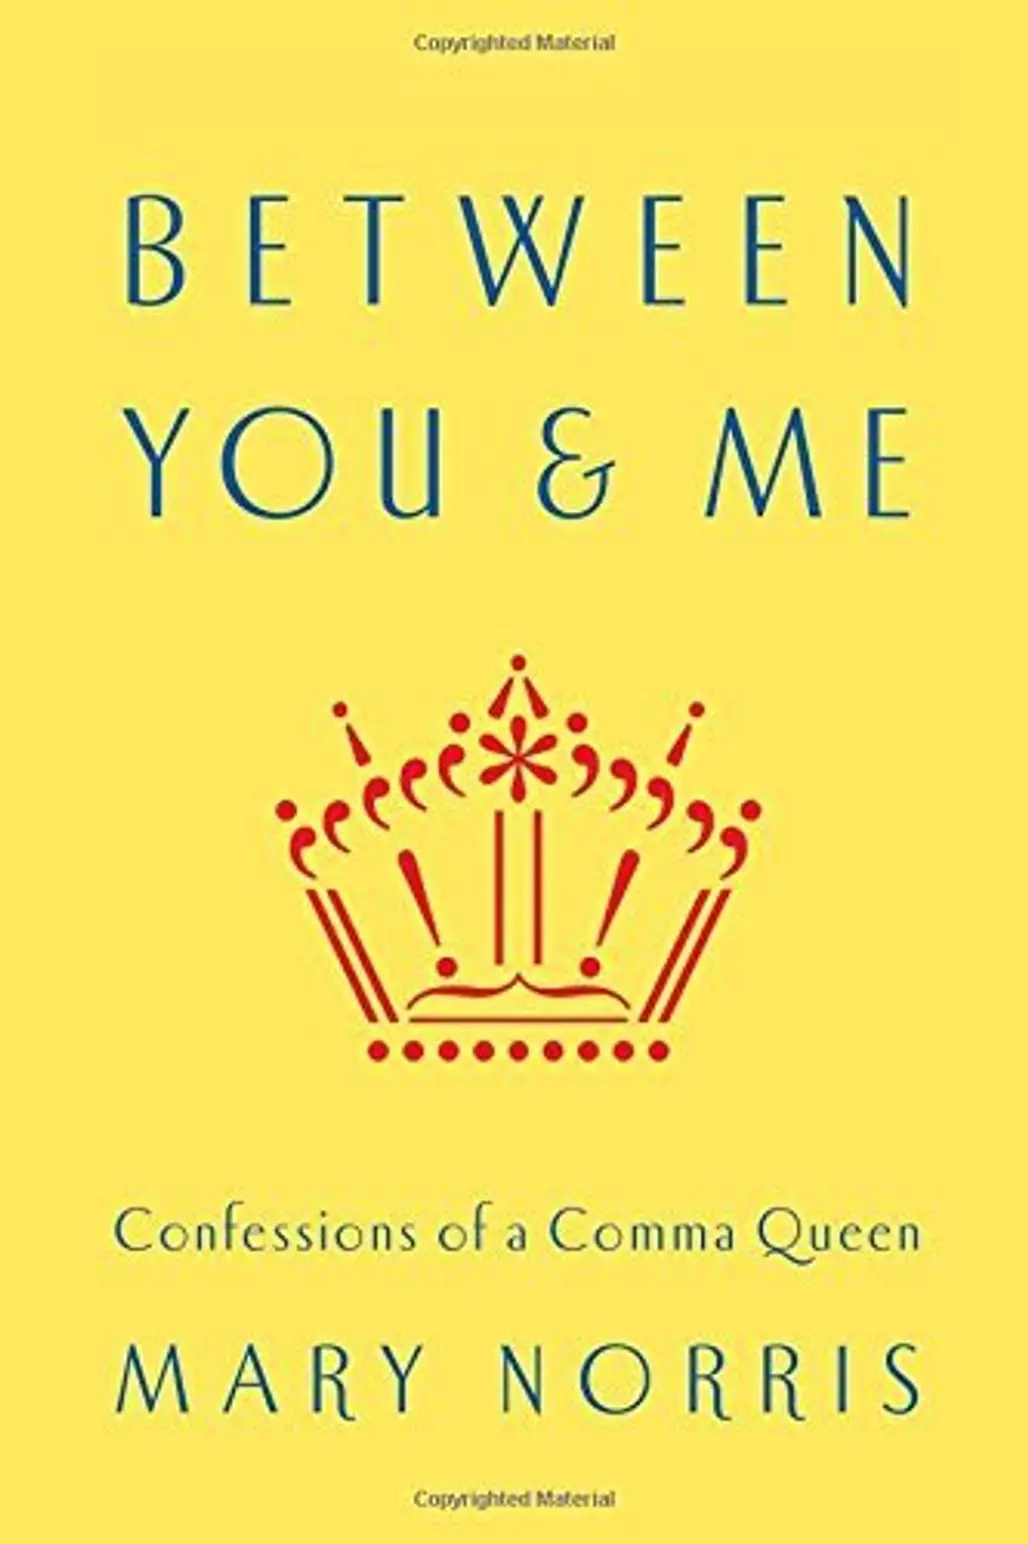 Between You & Me: Confessions of a Comma Queen by Mary Norris